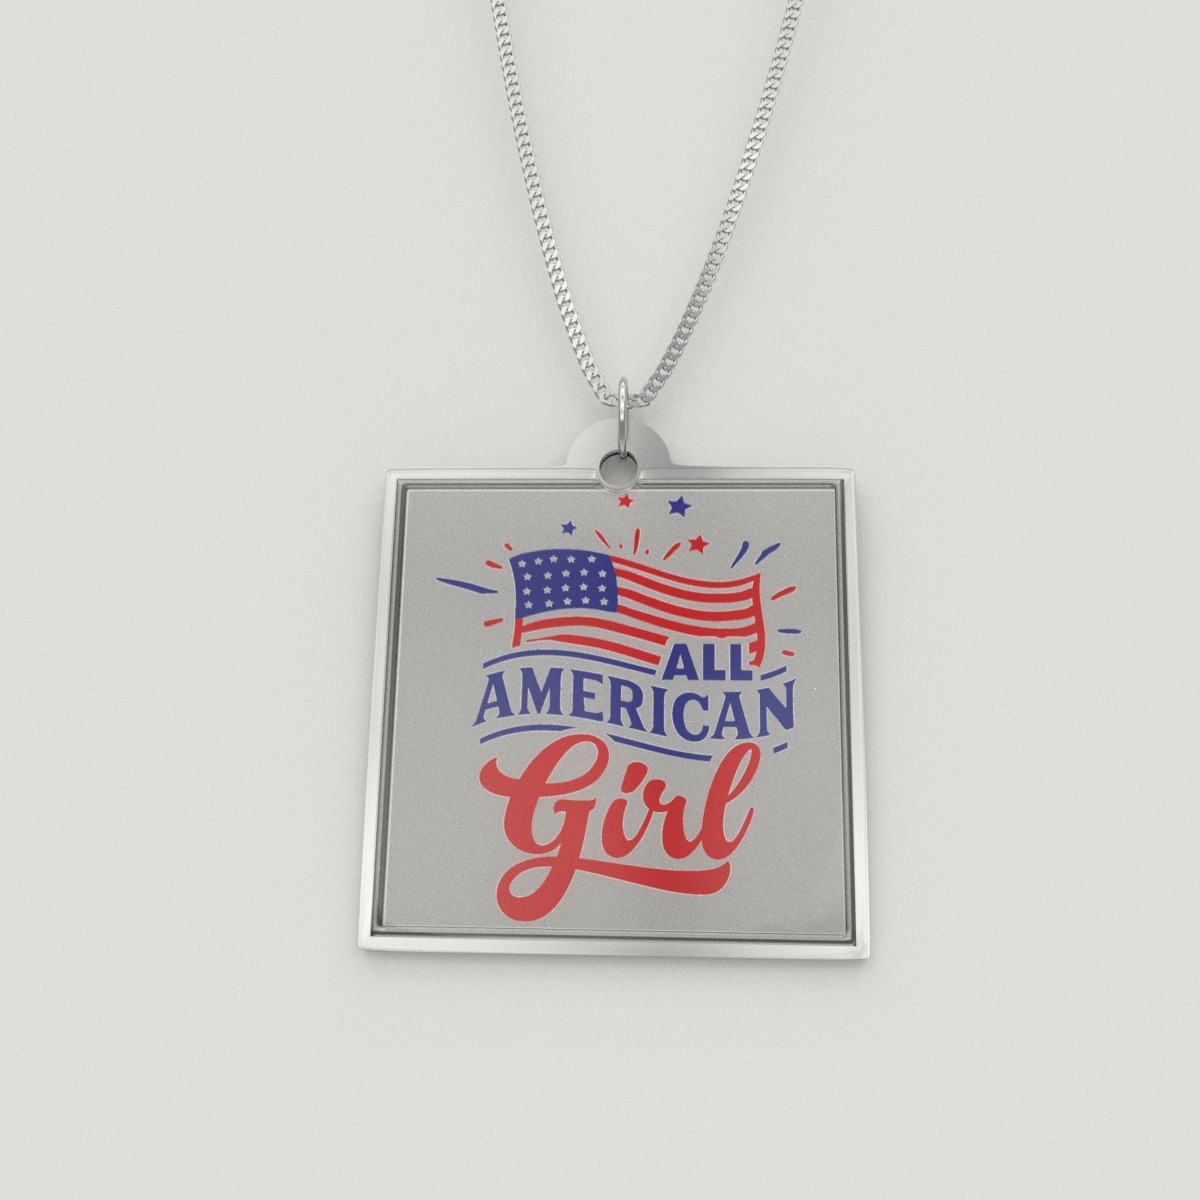 All American Girl Pendant Necklace